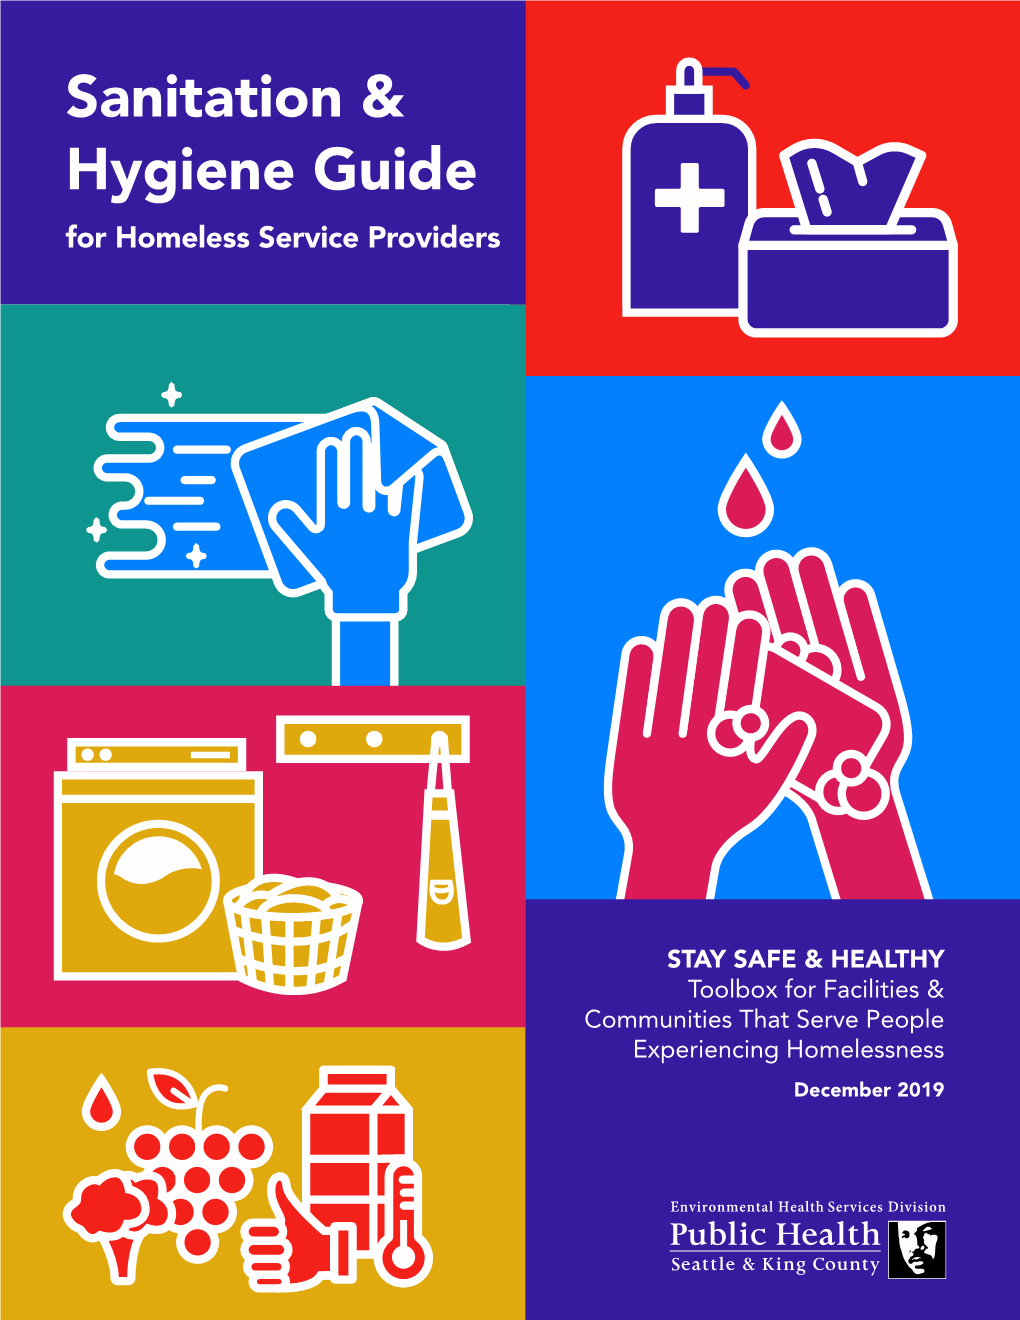 Sanitation and Hygiene Guide for Homeless Services Providers